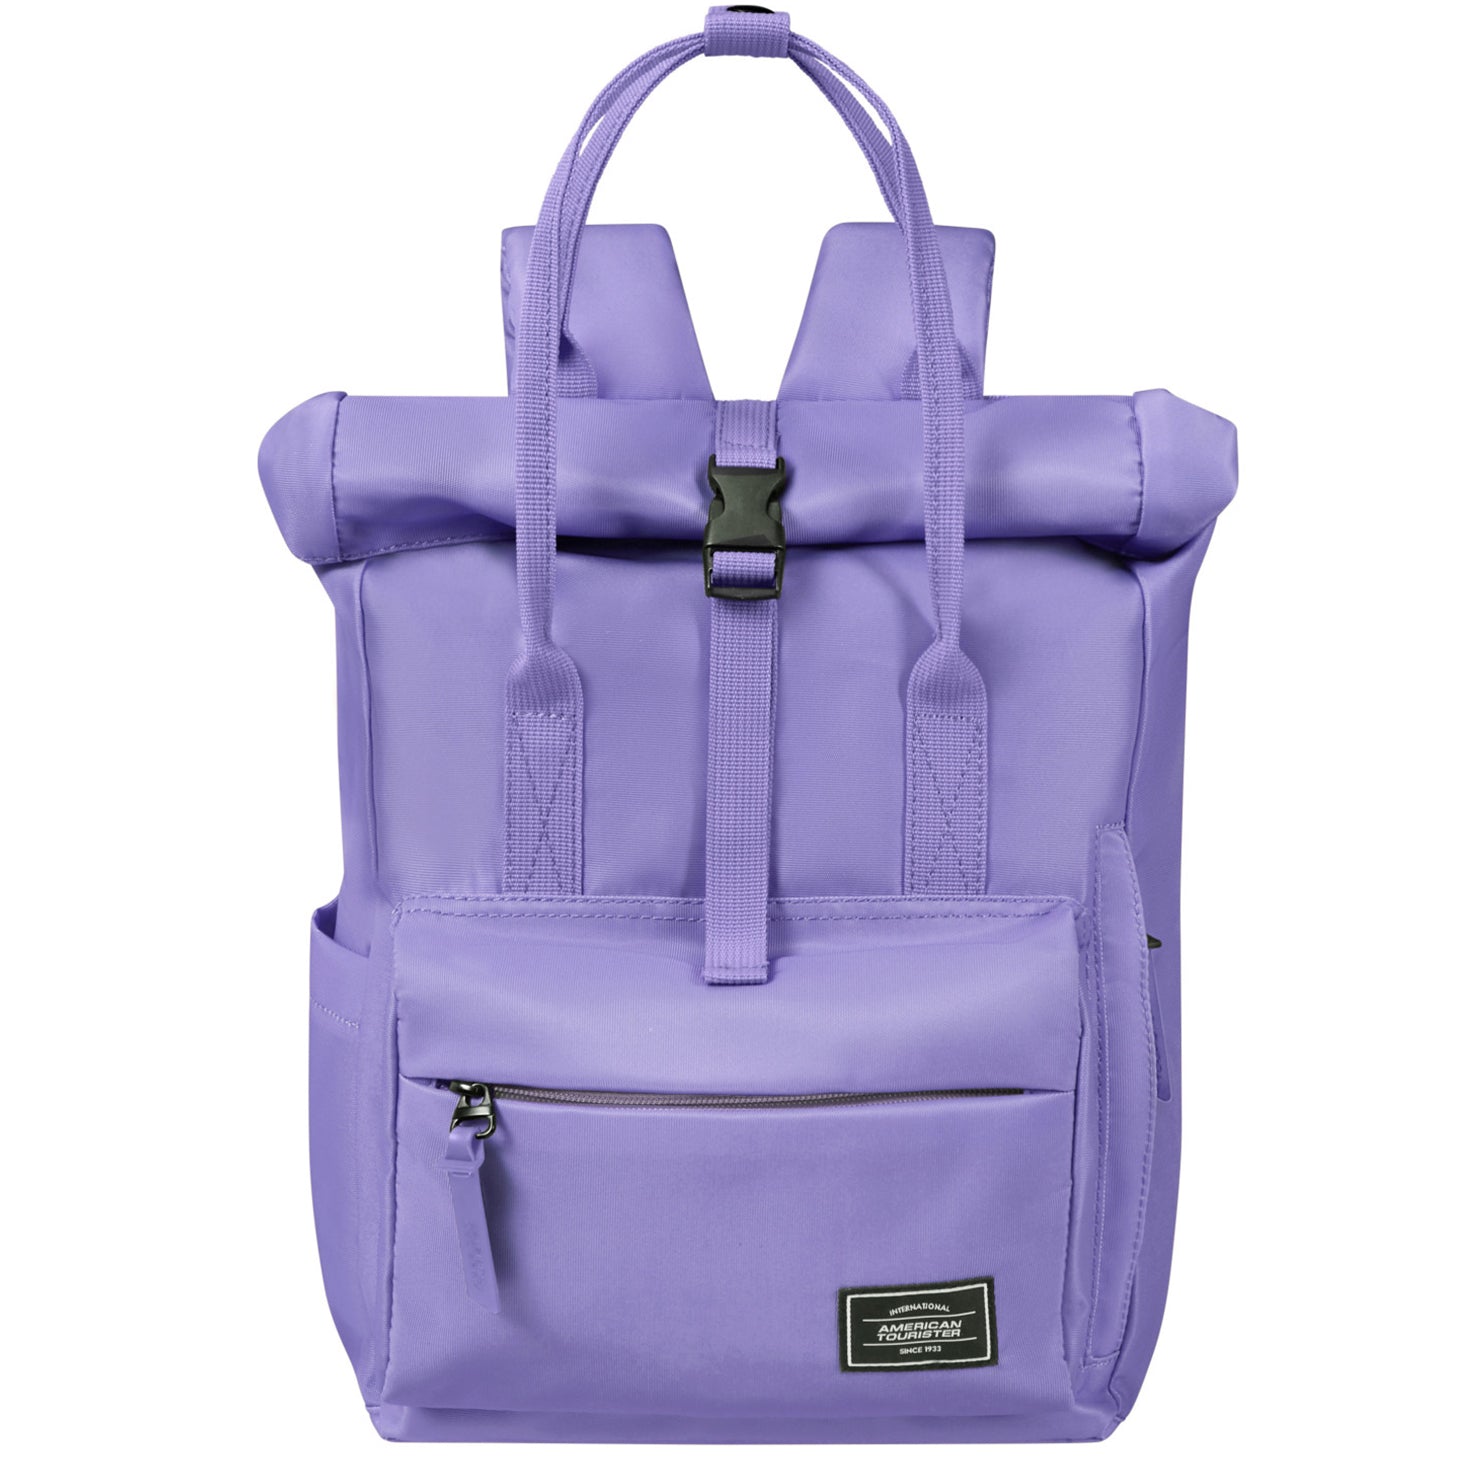 American Tourister Urban Groove City Backpack 36 cm - Soft Lilac